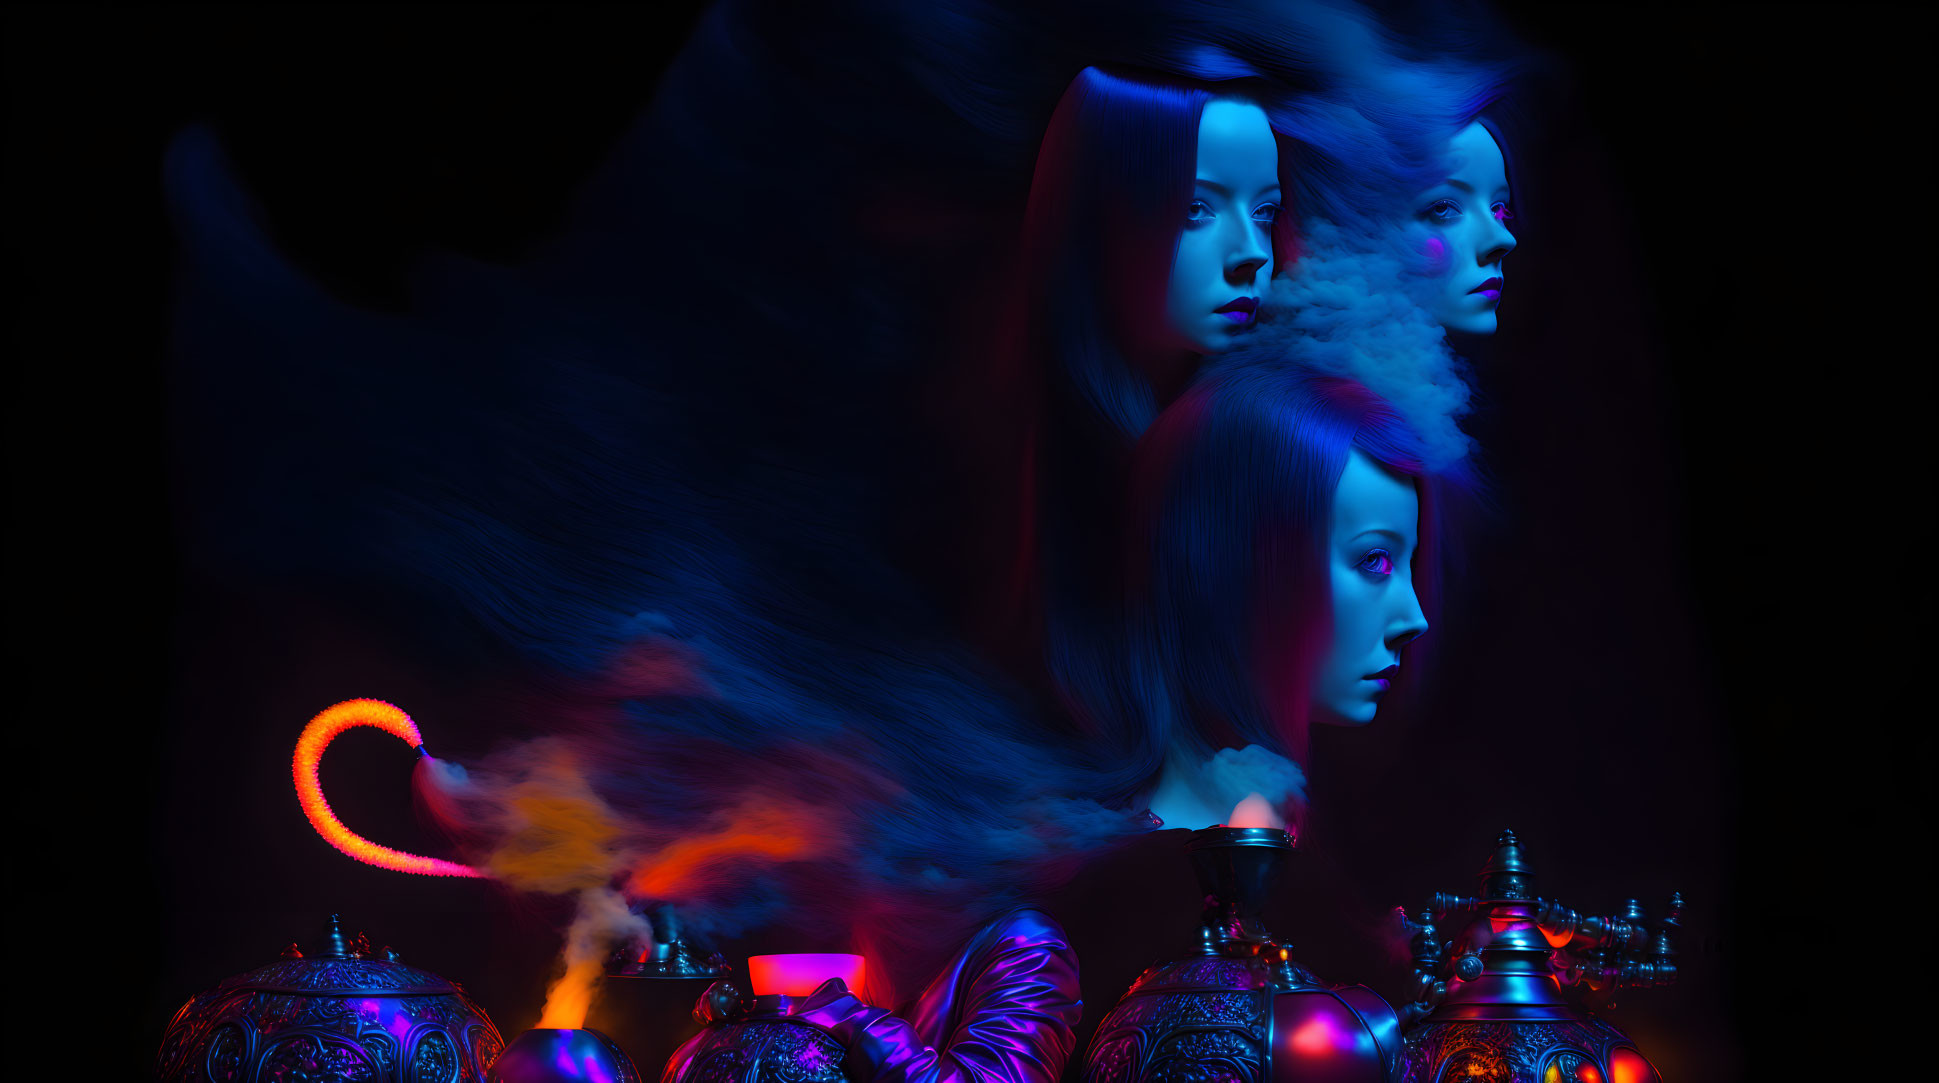 Colorful lighting illuminates female faces in abstract smoke with ornate metallic pots.